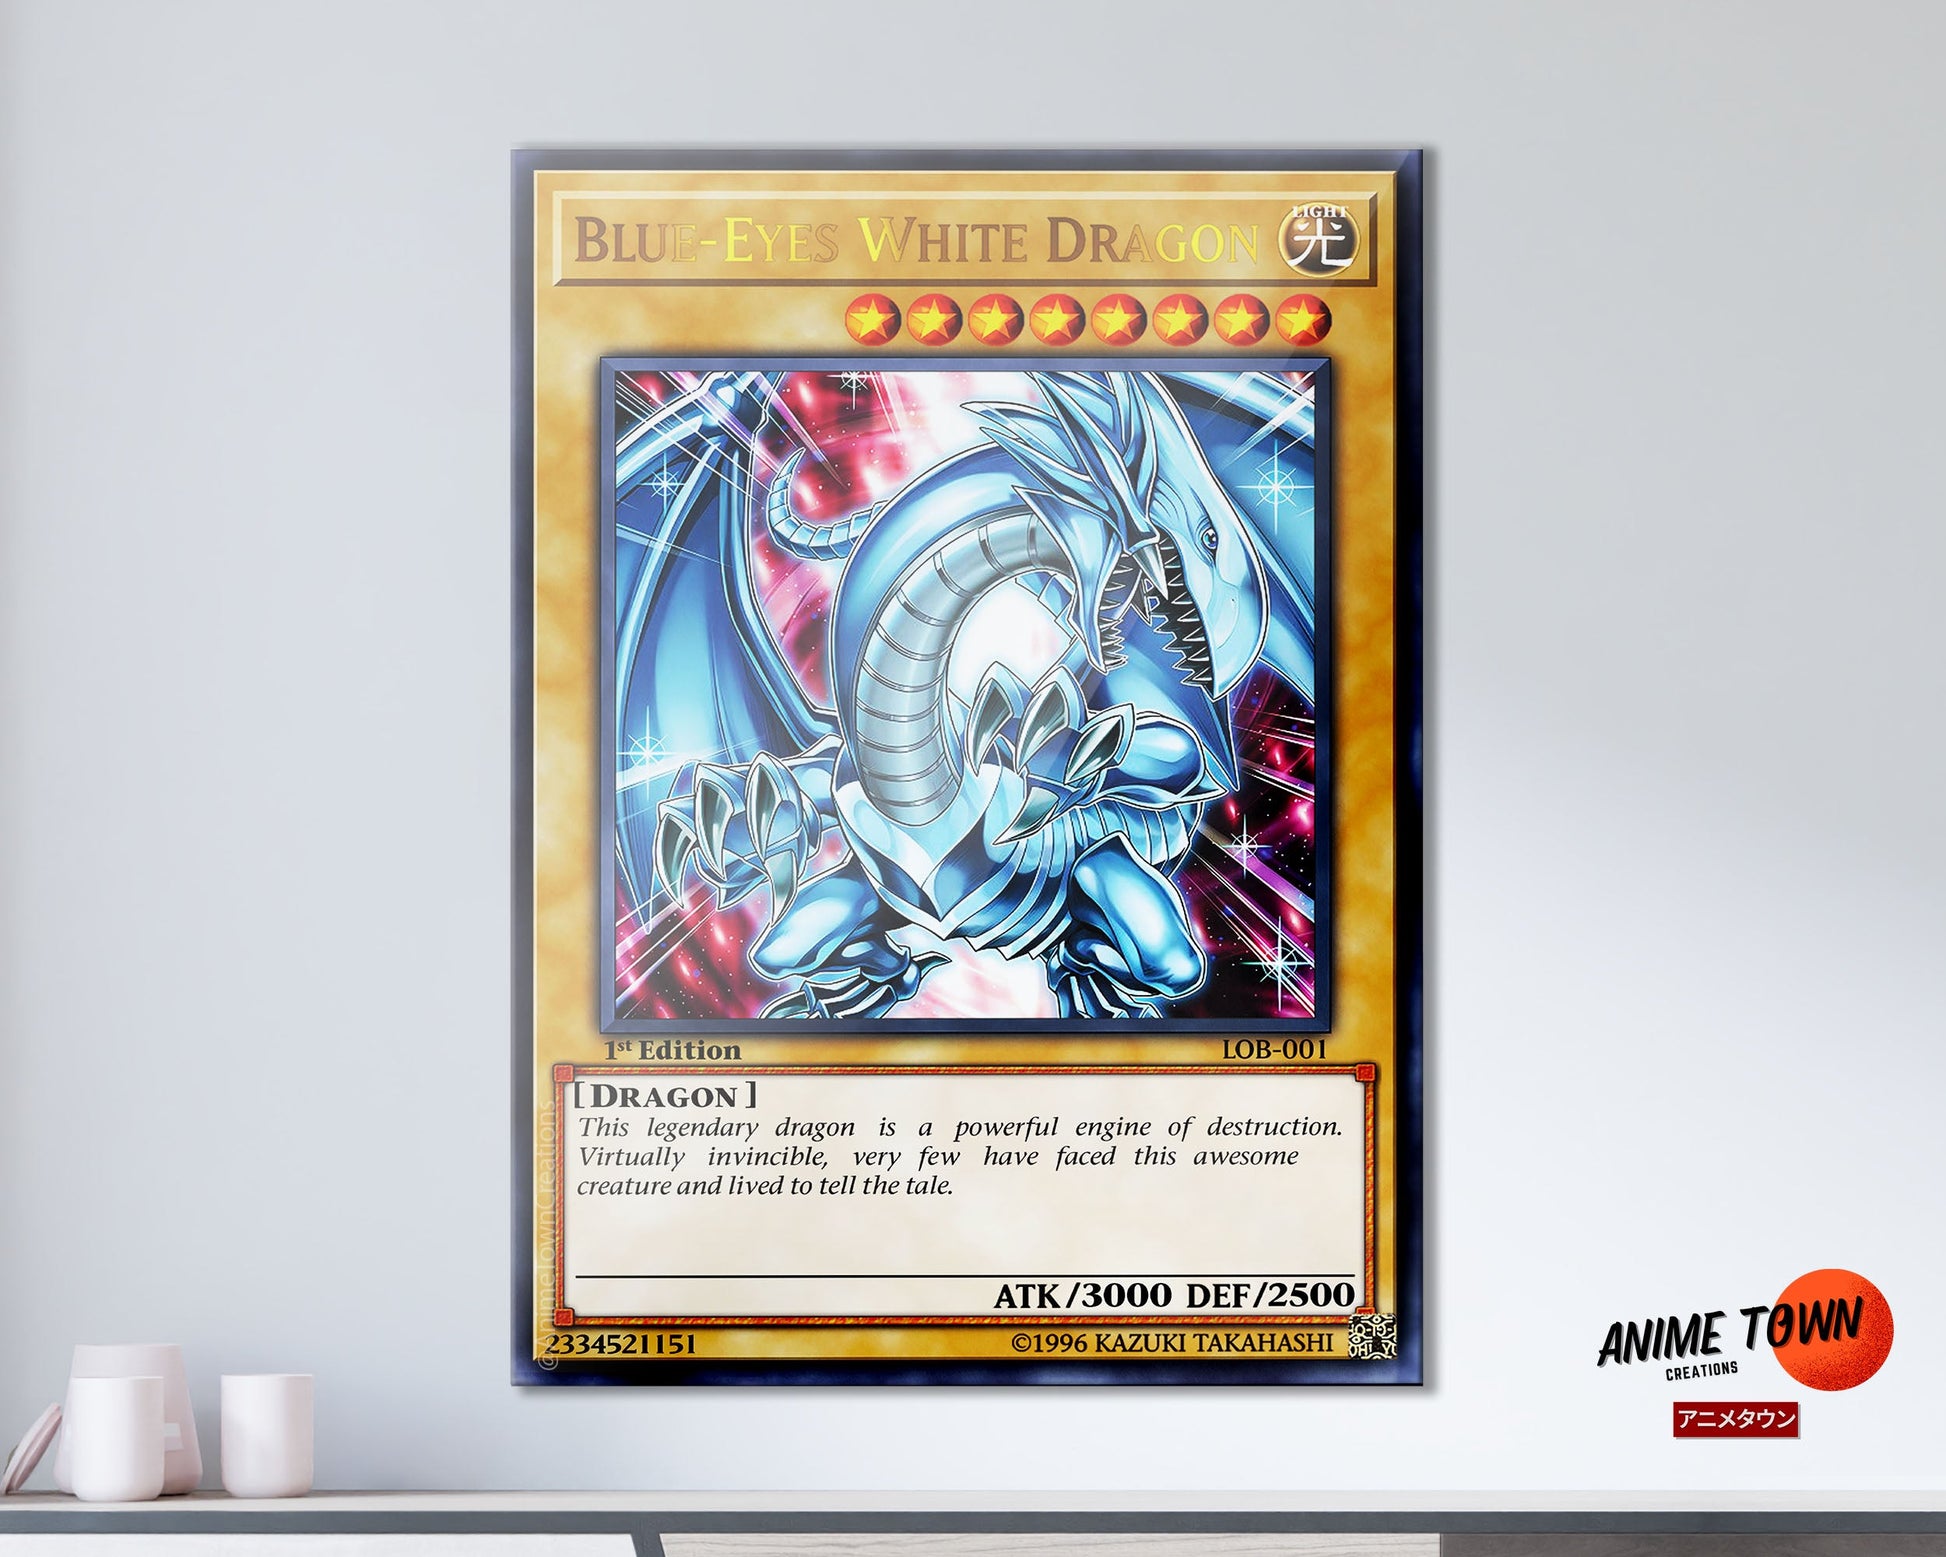 Anime Town Creations Metal Poster Yugioh Blue Eyes White Dragon 1st Edition Card 11" x 17" Home Goods - Anime Yu-Gi-Oh Metal Poster